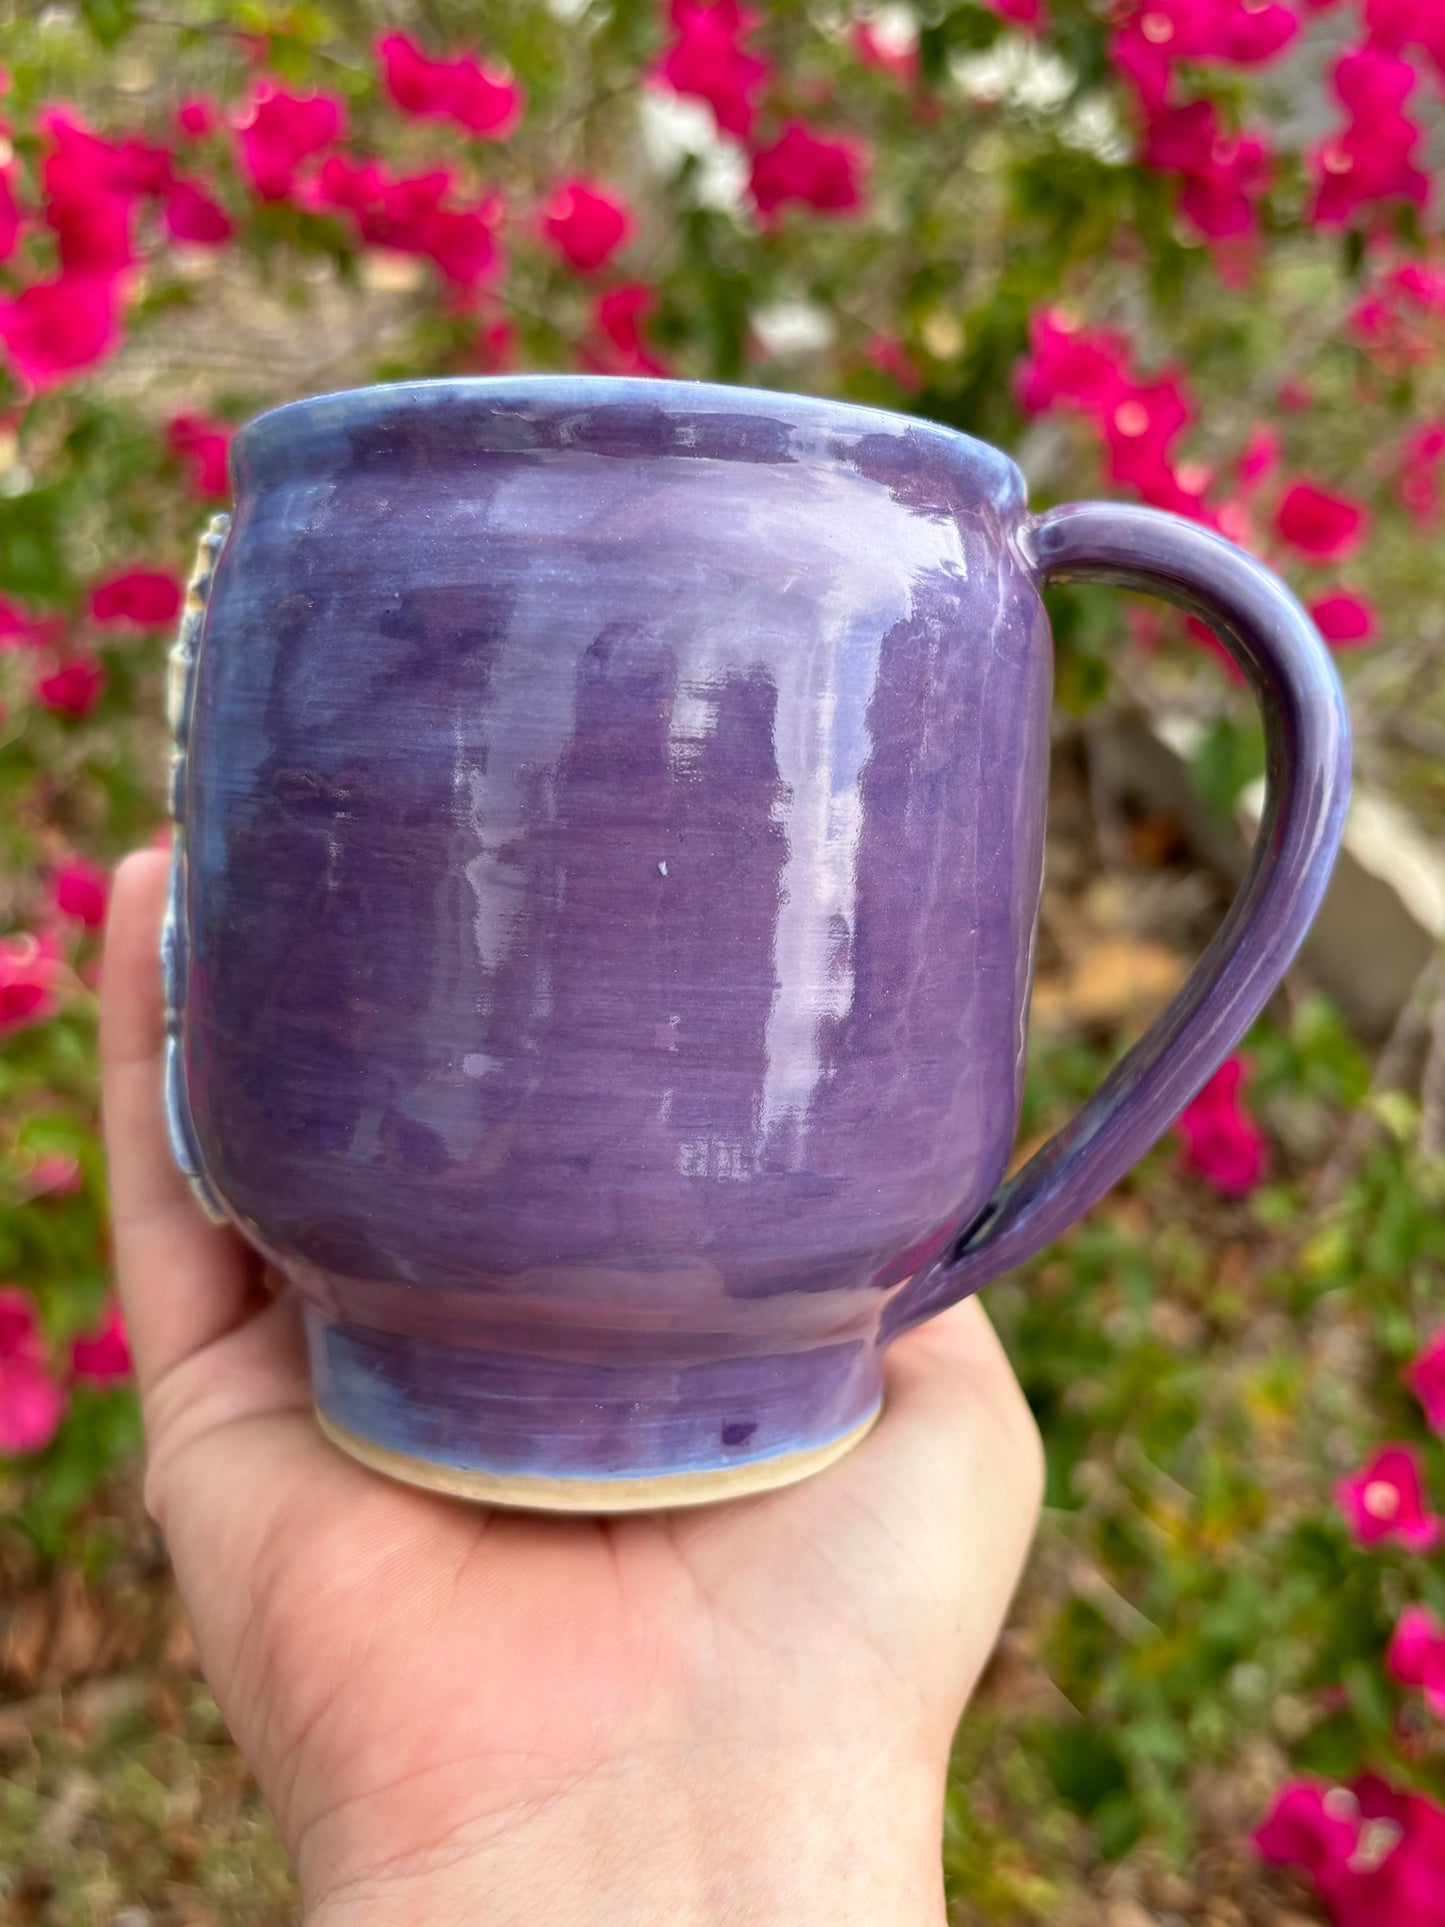 Photo of a large purple mug in the artist's had set against a background of bushes with pink flowers.